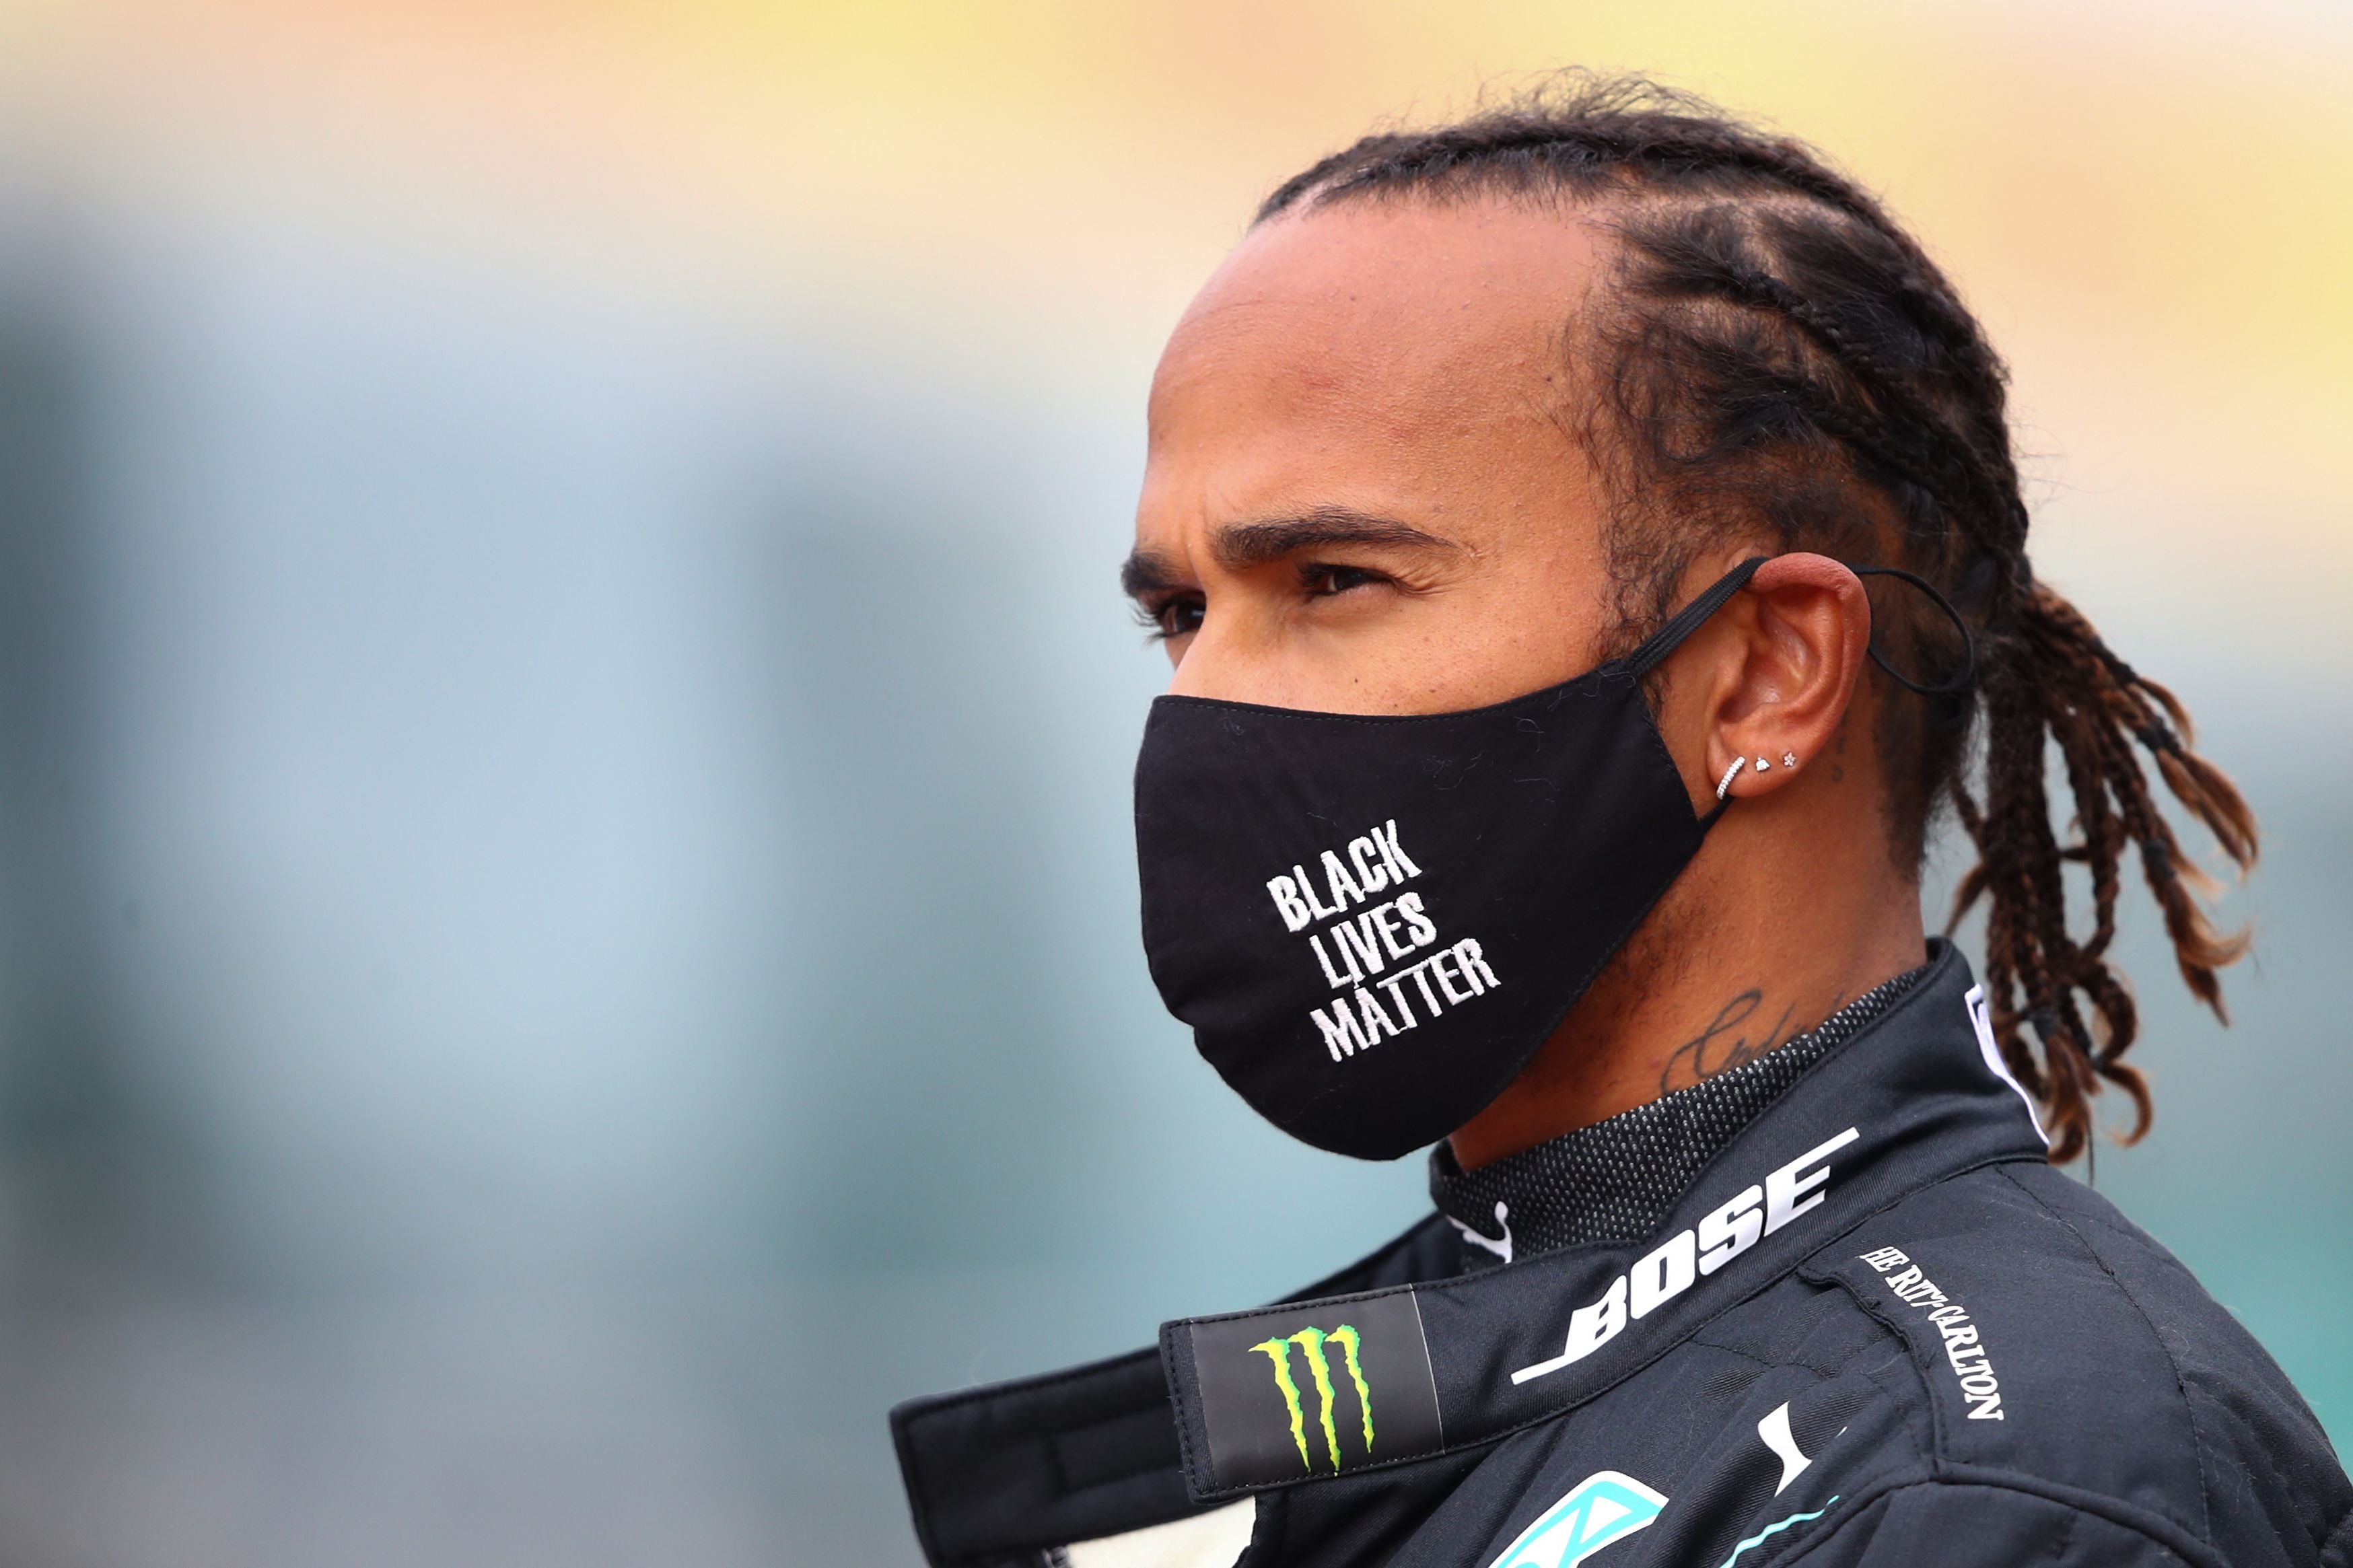 Lewis Hamilton supports Art for Animals, helping to protect biodiversity by ending the illegal wildlife trade